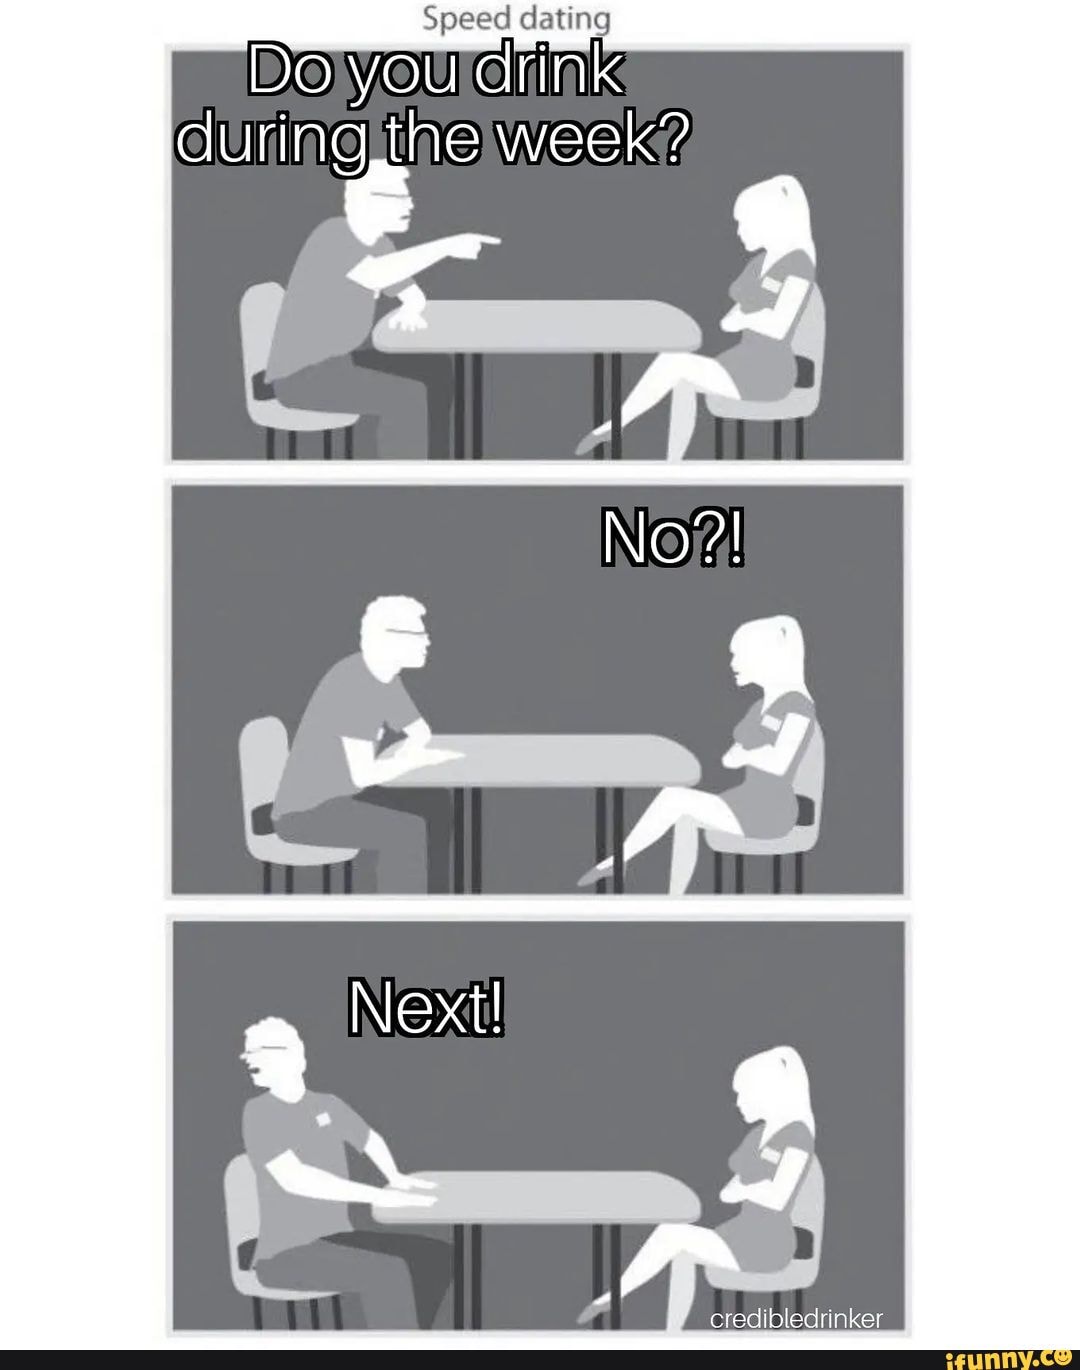 Dating funny speed Top 30